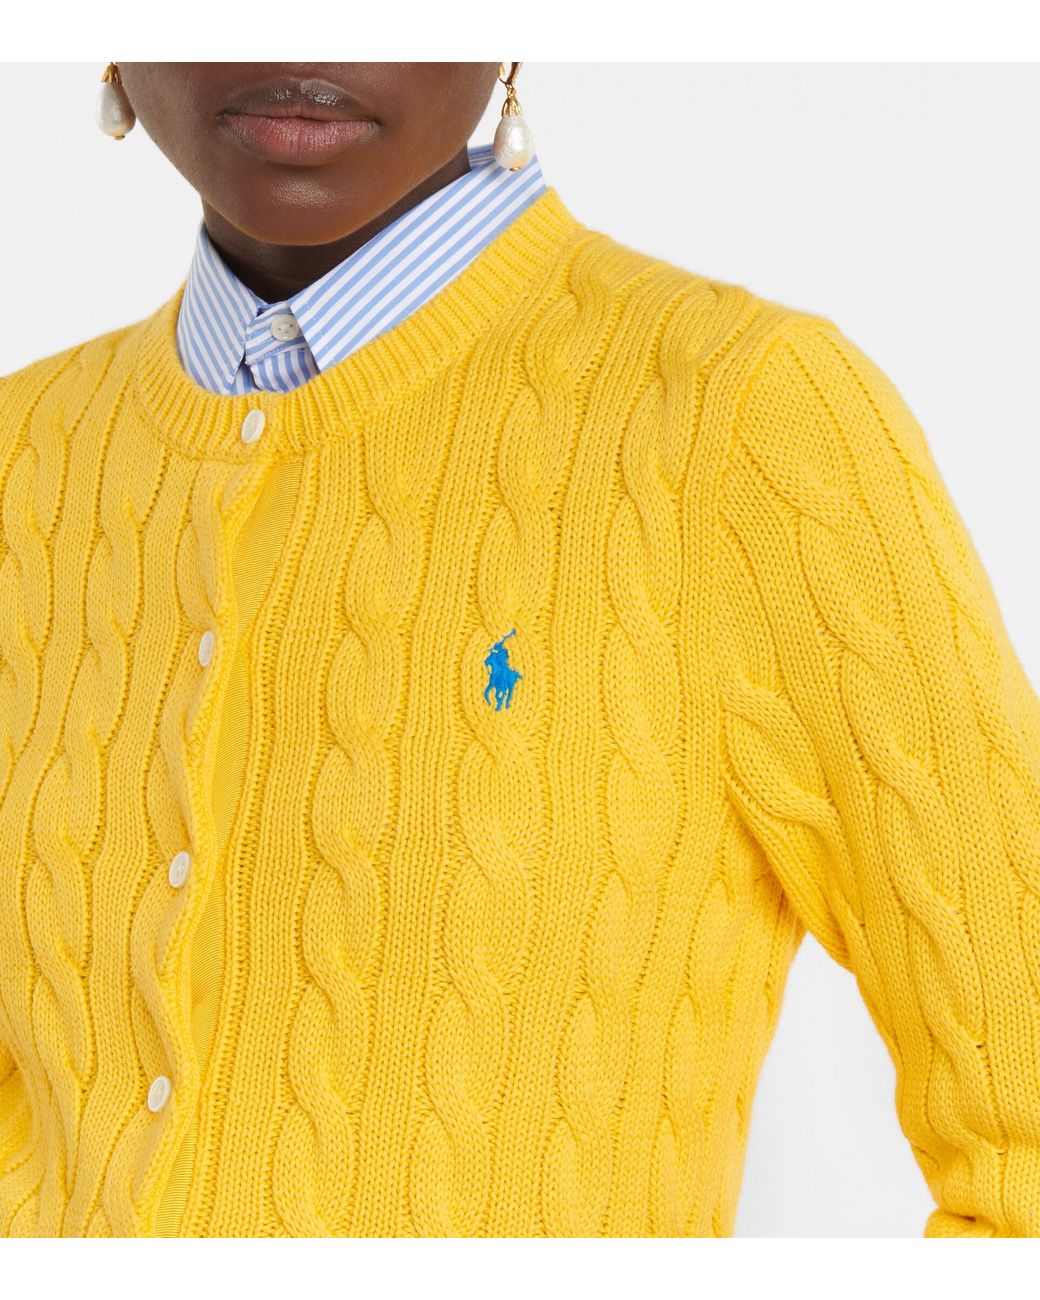 Polo Ralph Lauren Cable-knit Cotton Cardigan in Yellow | Lyst